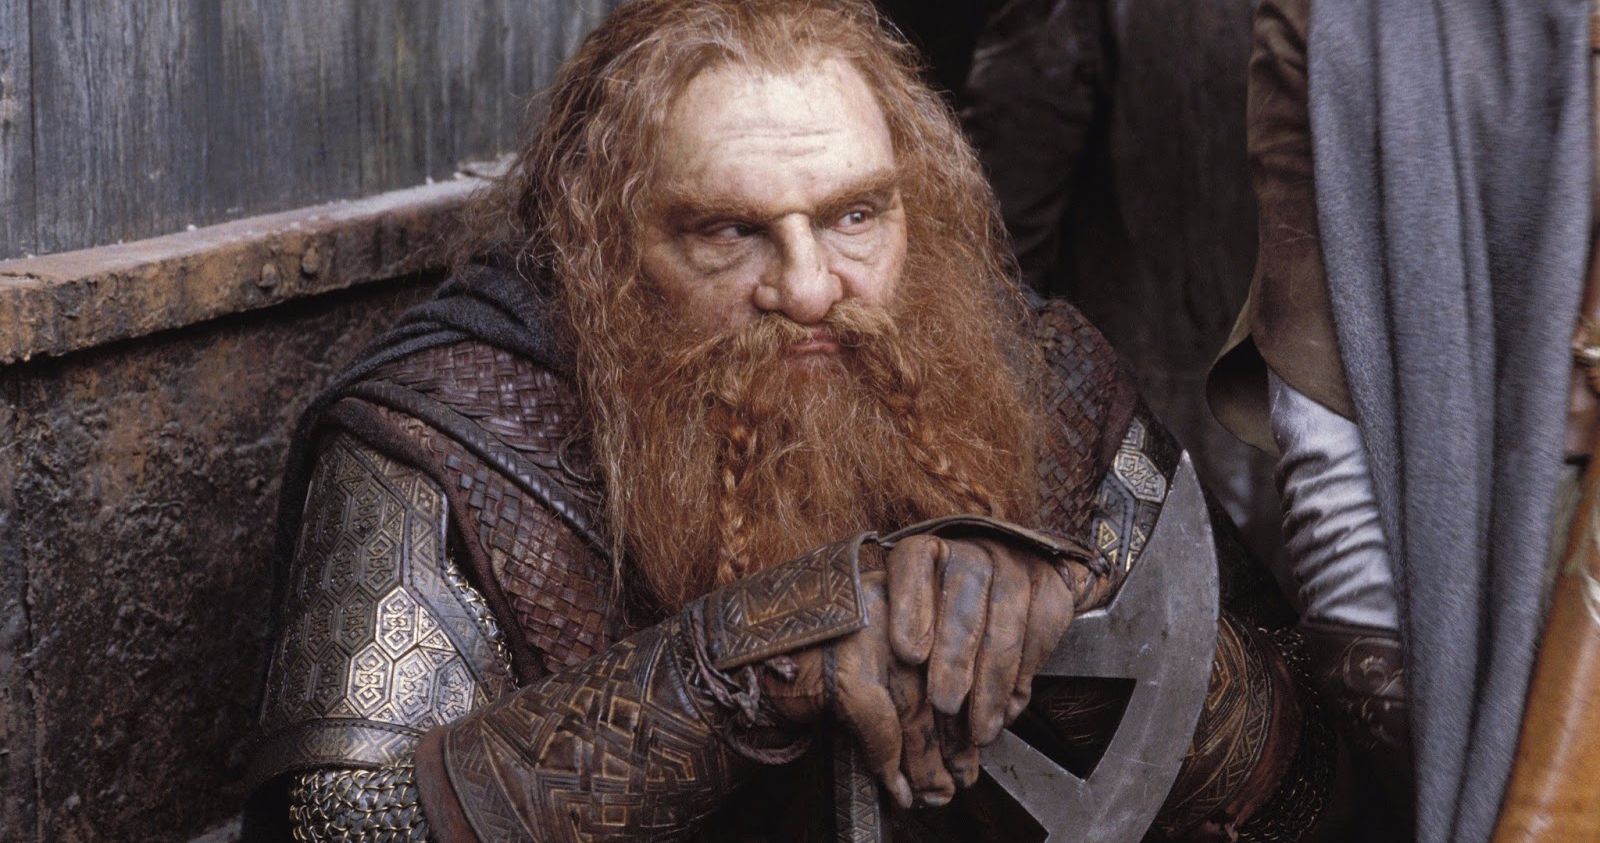 Lord of the Rings TV Show Casting Call Is Searching for 'Funky Looking People'